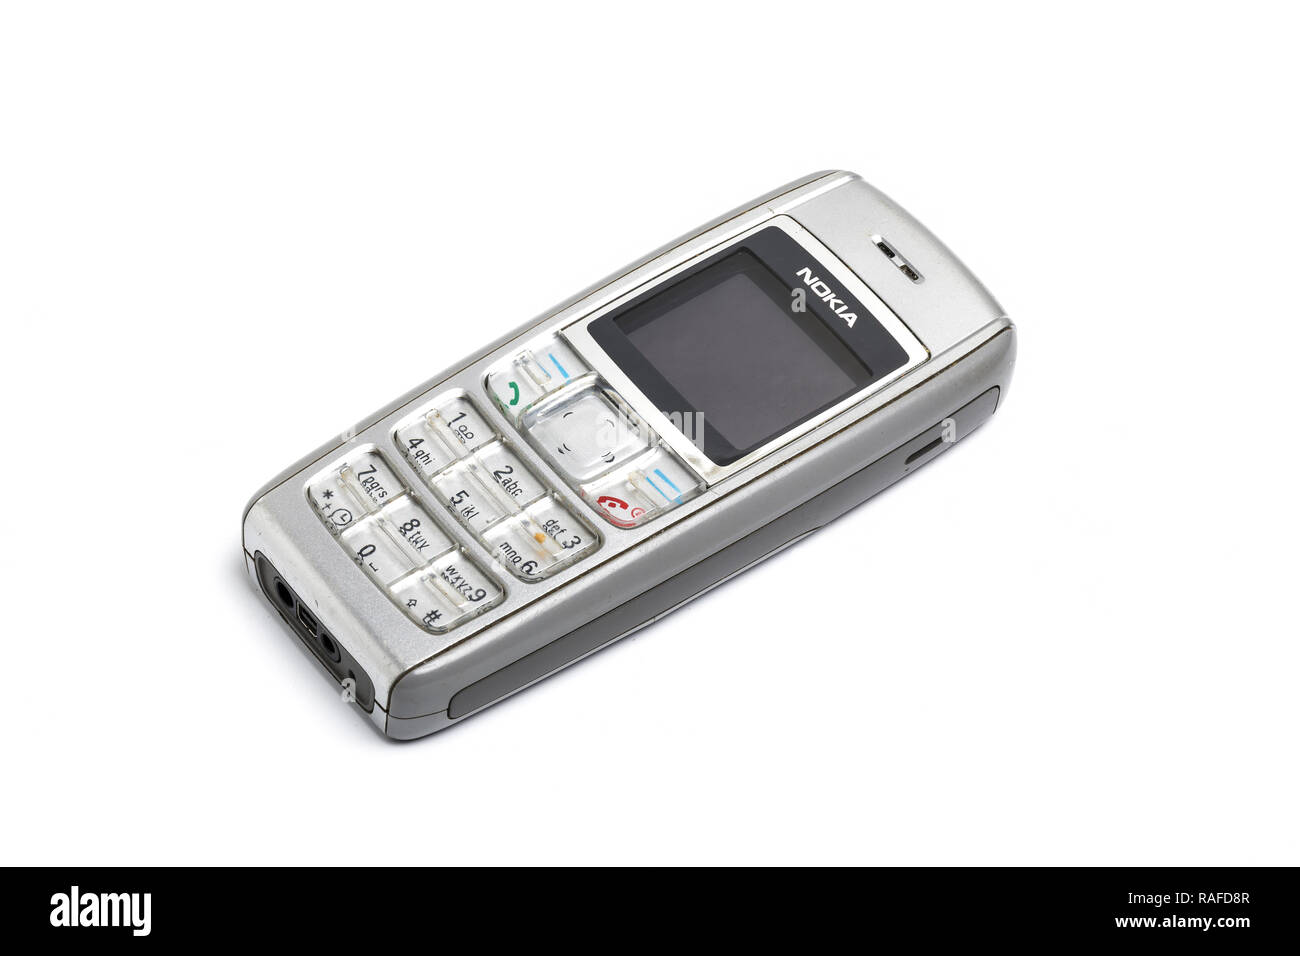 Nokia 1600 mobile phone or cell phone, from 2006. Well used Stock Photo -  Alamy